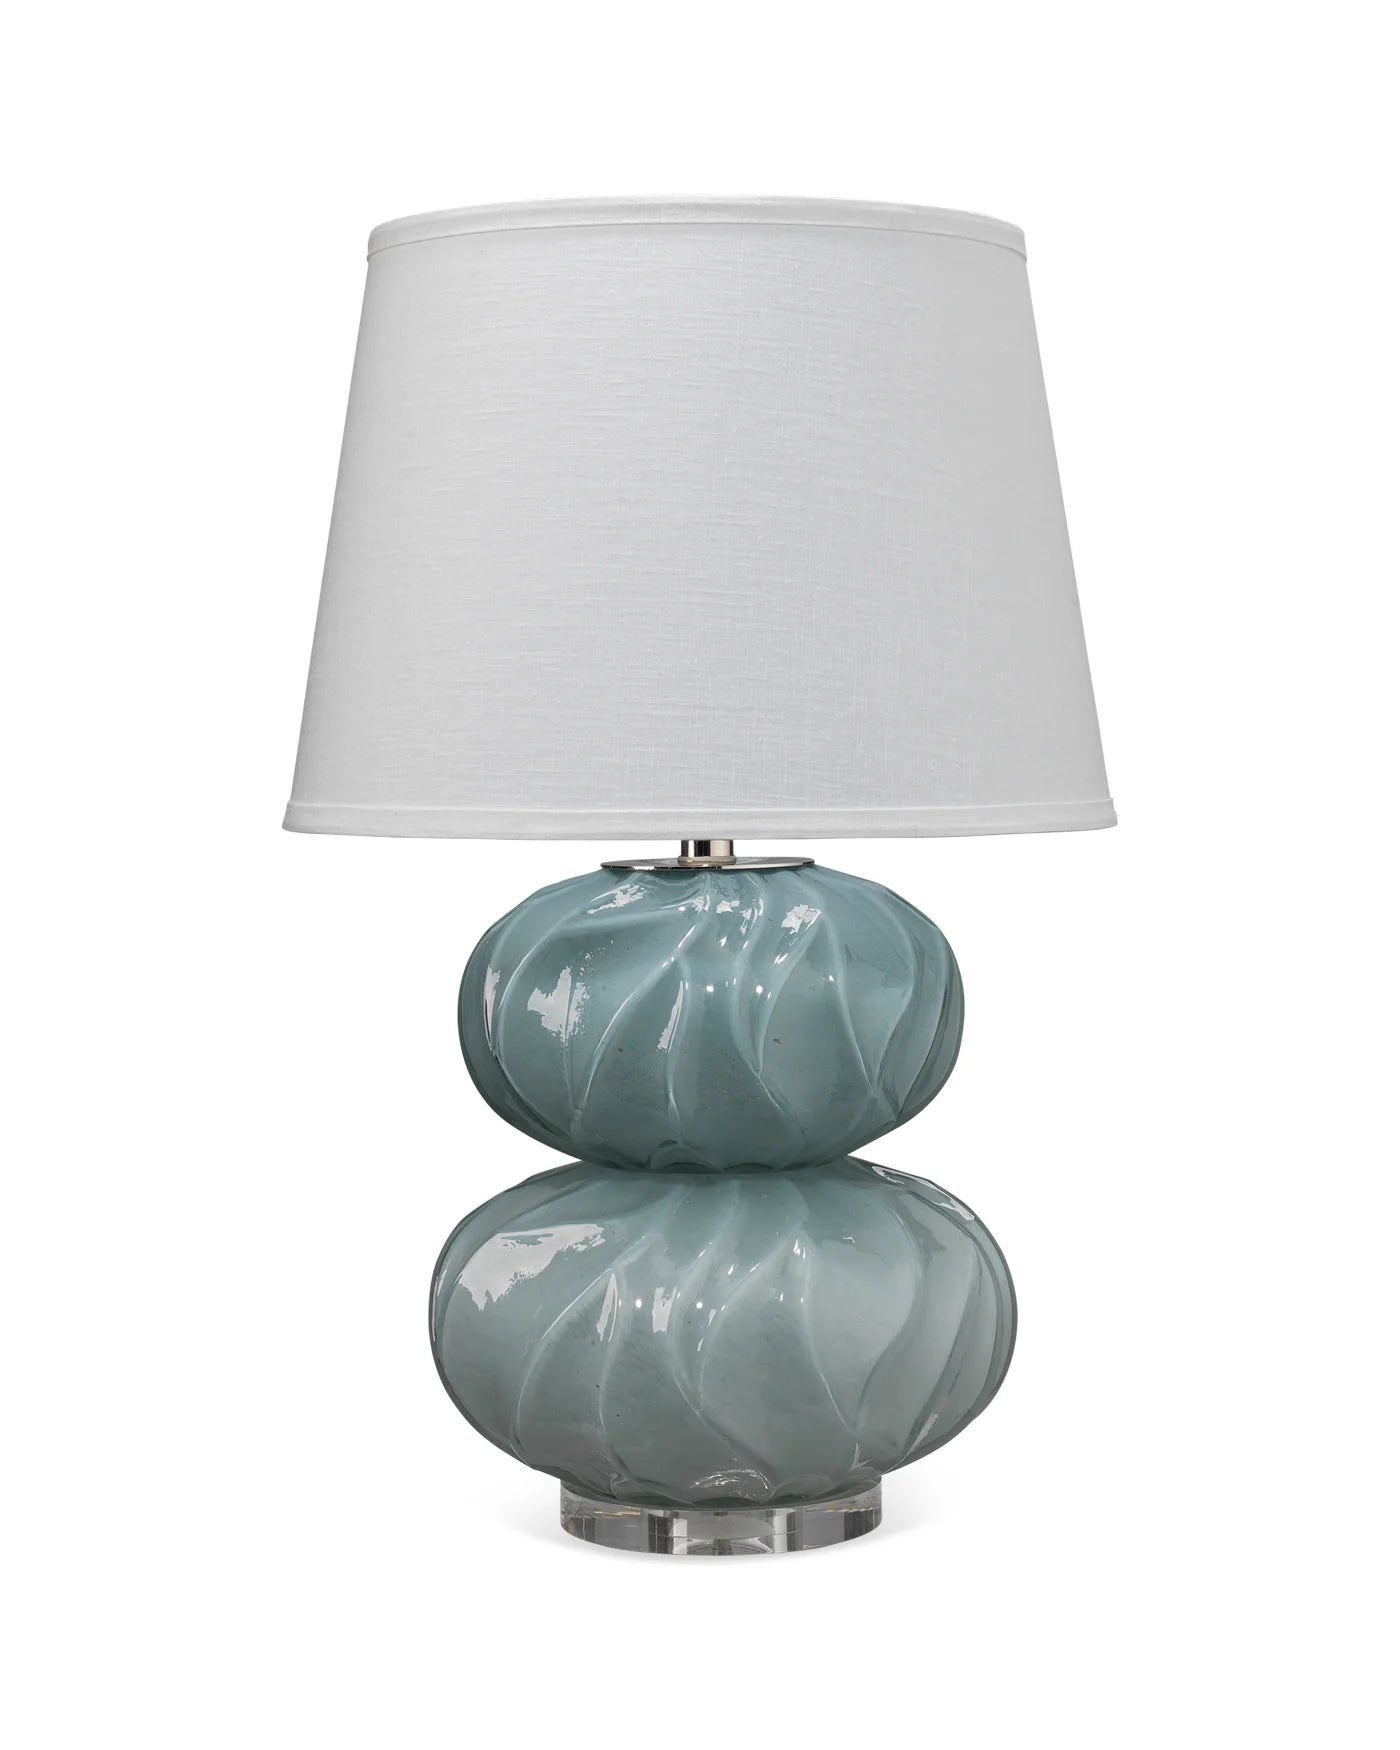 Pricilla Double Gourd Table Lamp - Blue